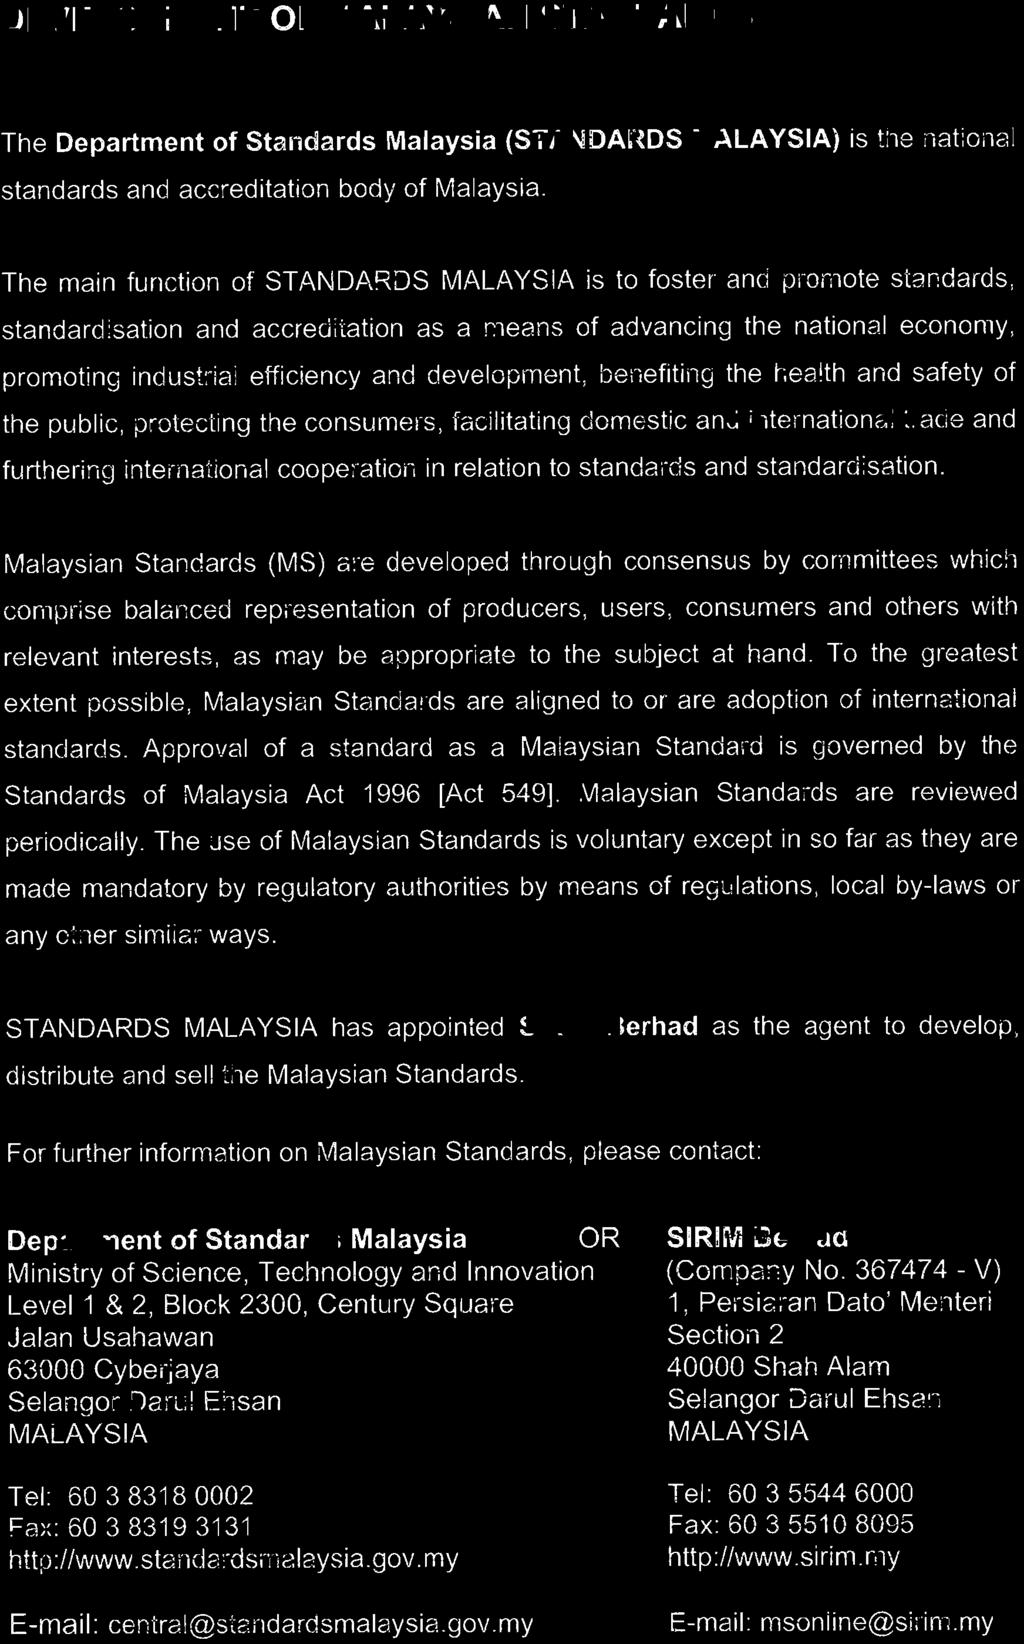 DEVELOPMENT OF MALAYSIAN STANDARDS The Department of Standards Malaysia (STANDARDS MALAYSIA) is the national standards and accreditation body of Malaysia.